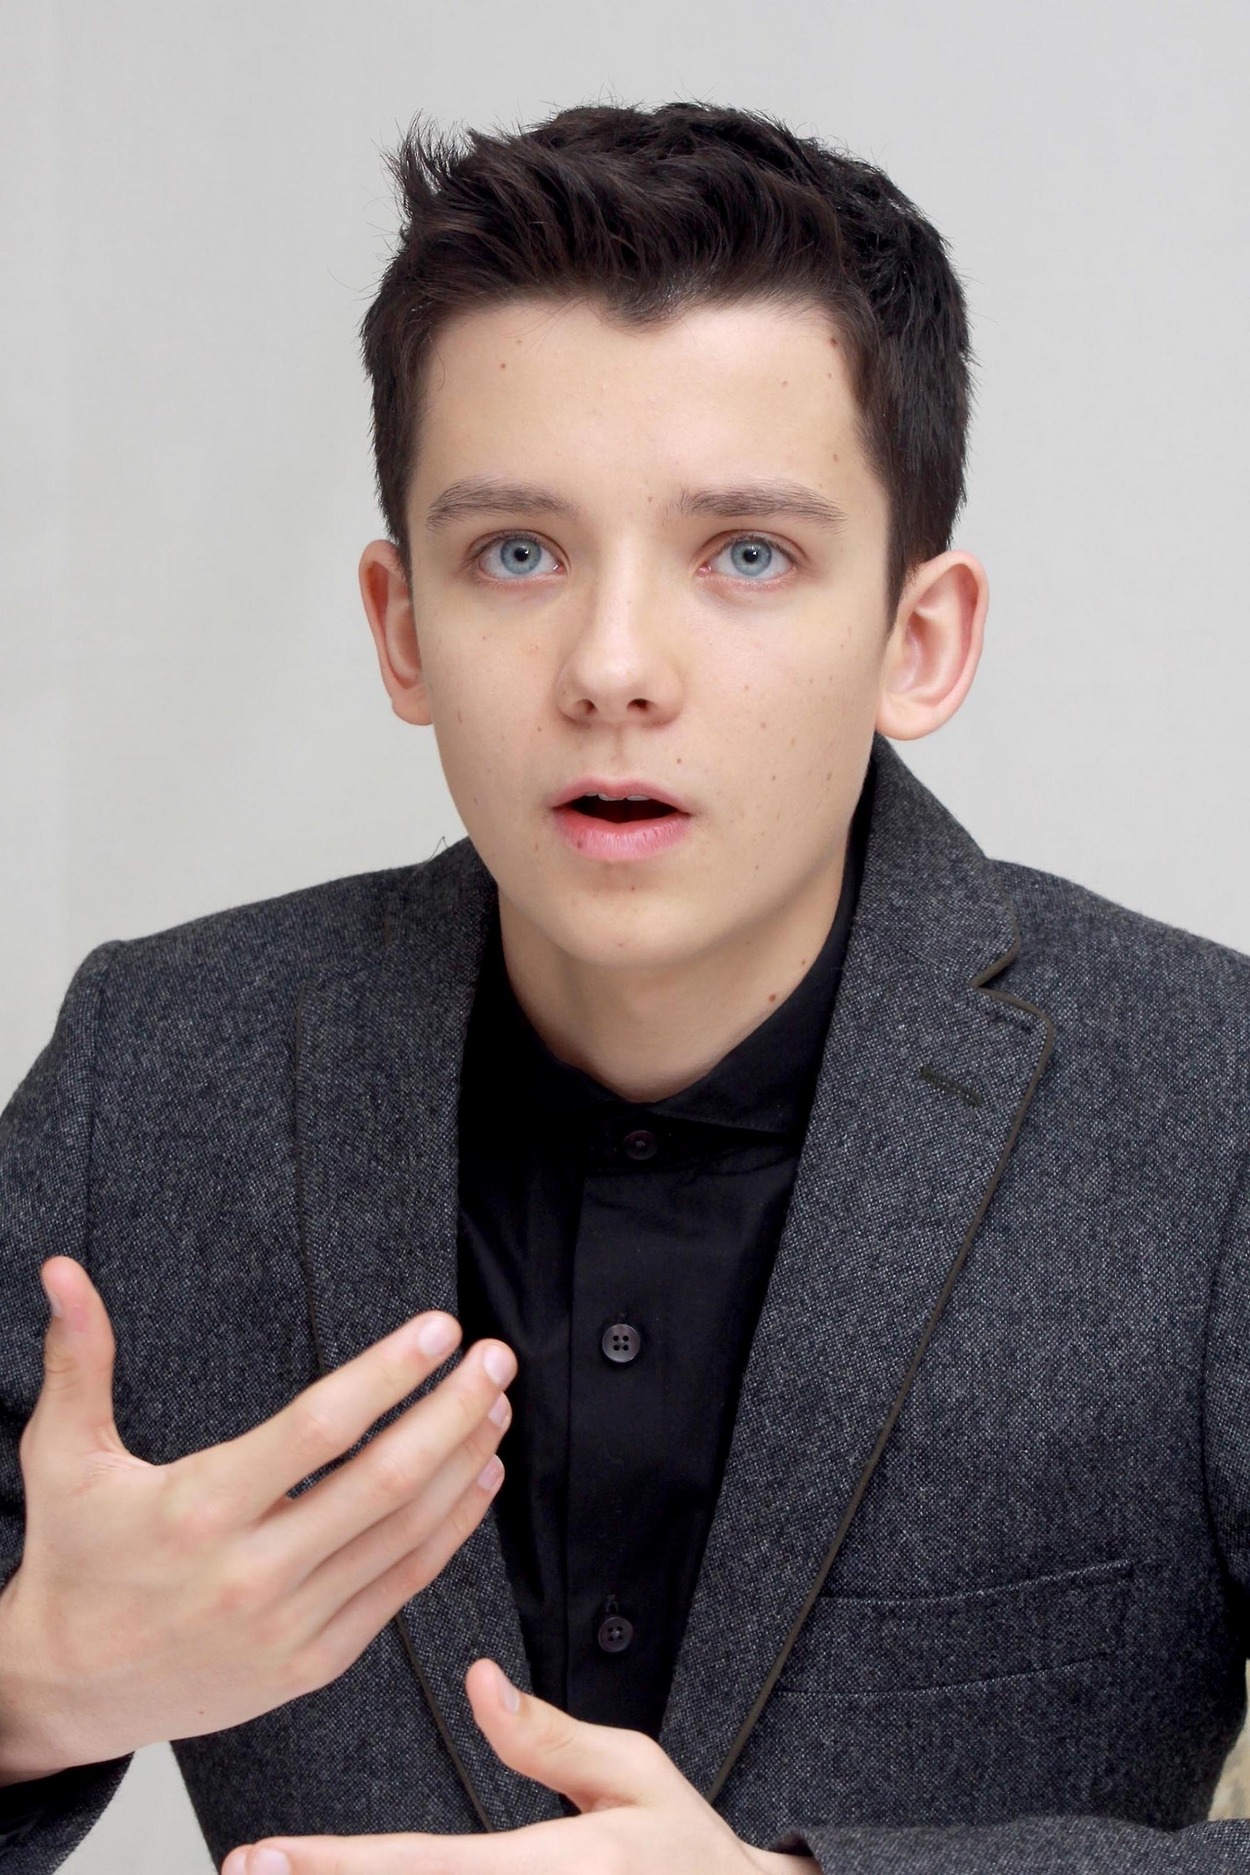 Asa Butterfield photo 14 of 14 pics, wallpaper - photo #673349 - ThePlace2